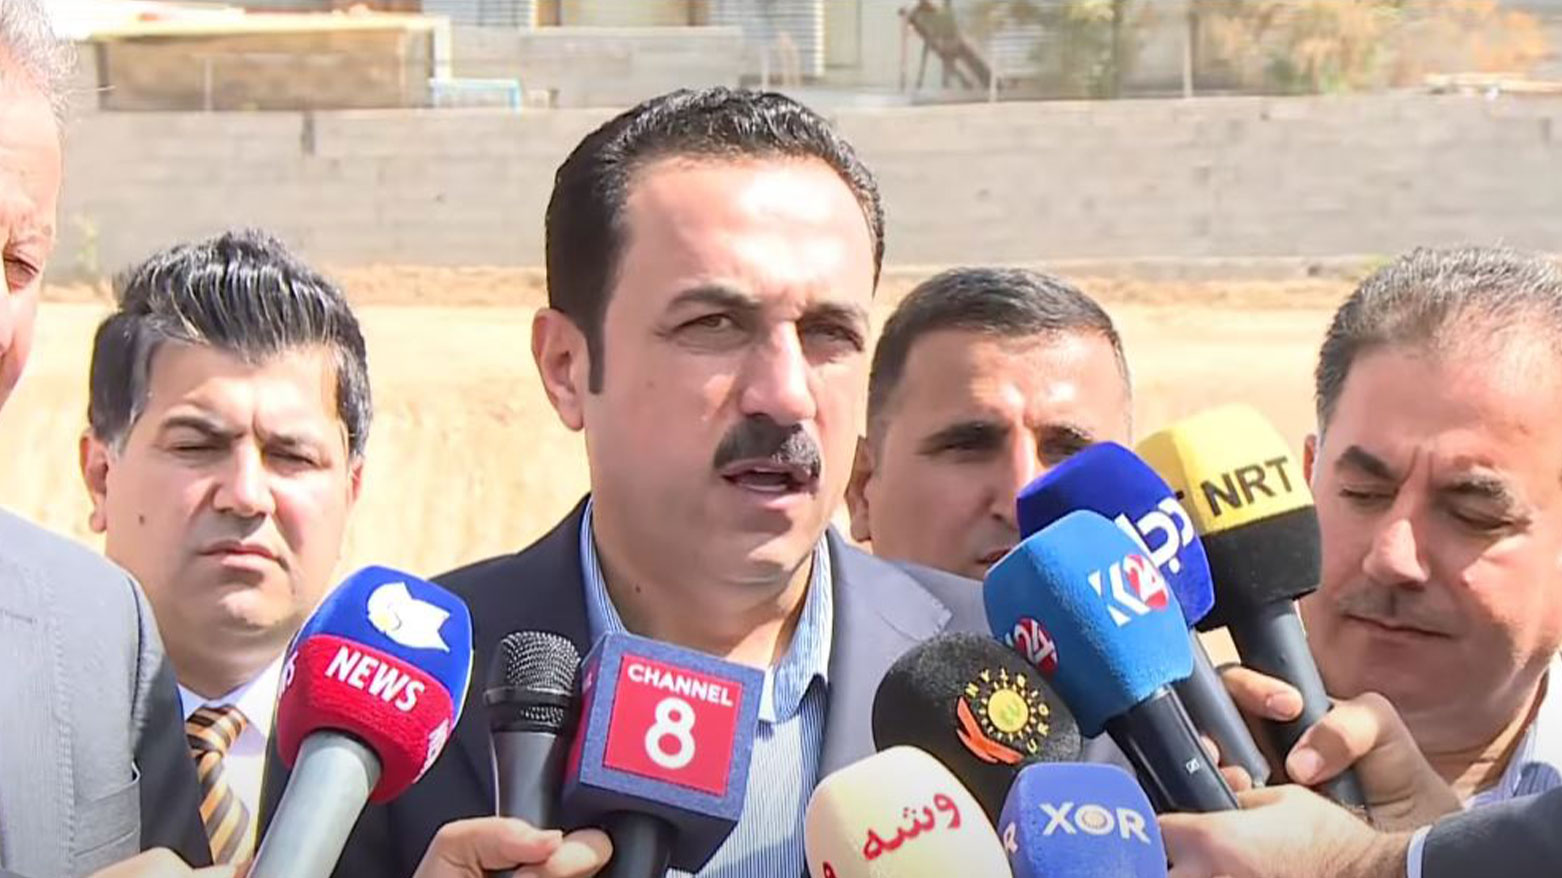 The Governor of Erbil, Omed Khoshnaw, speaking in the press conference, Sept. 30, 2023. (Photo: Kurdistan 24)